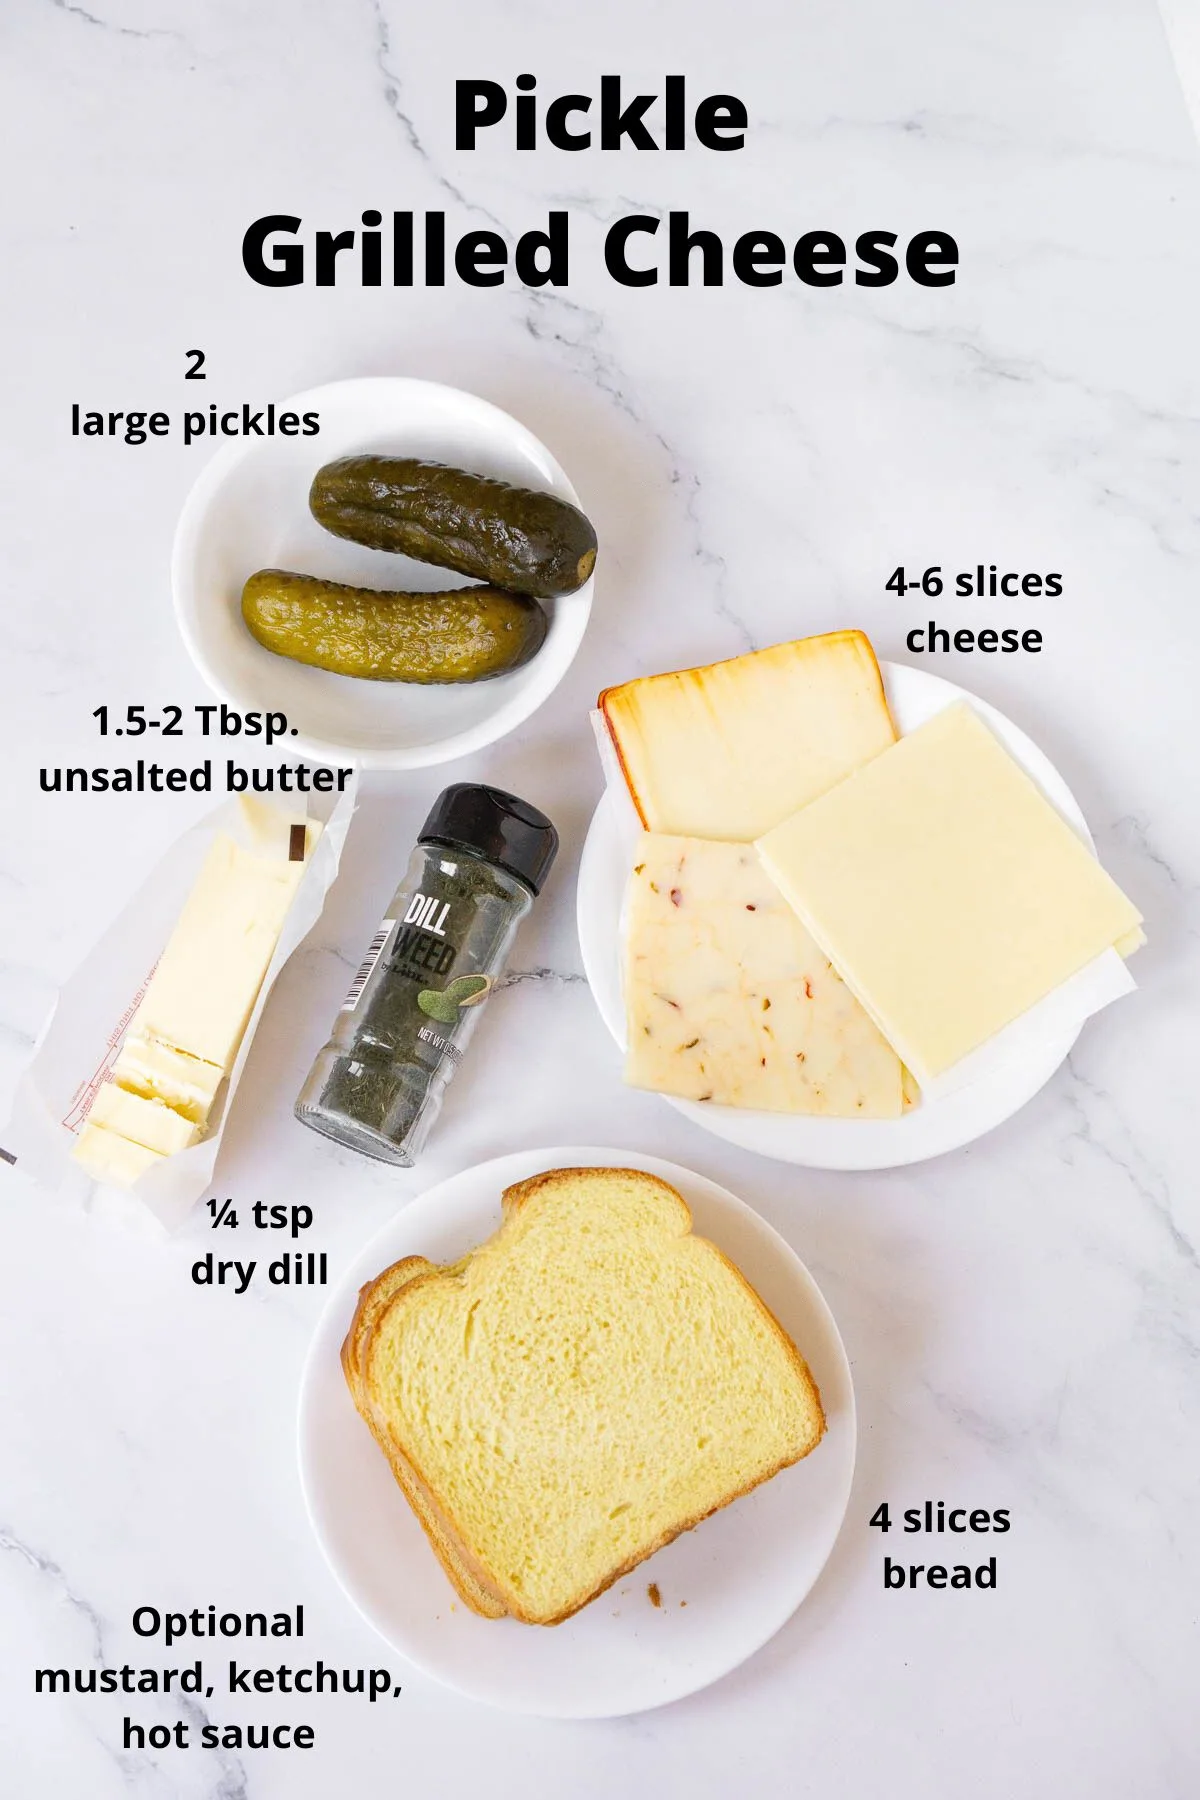 Ingredients to make a pickle grilled cheese sandwich